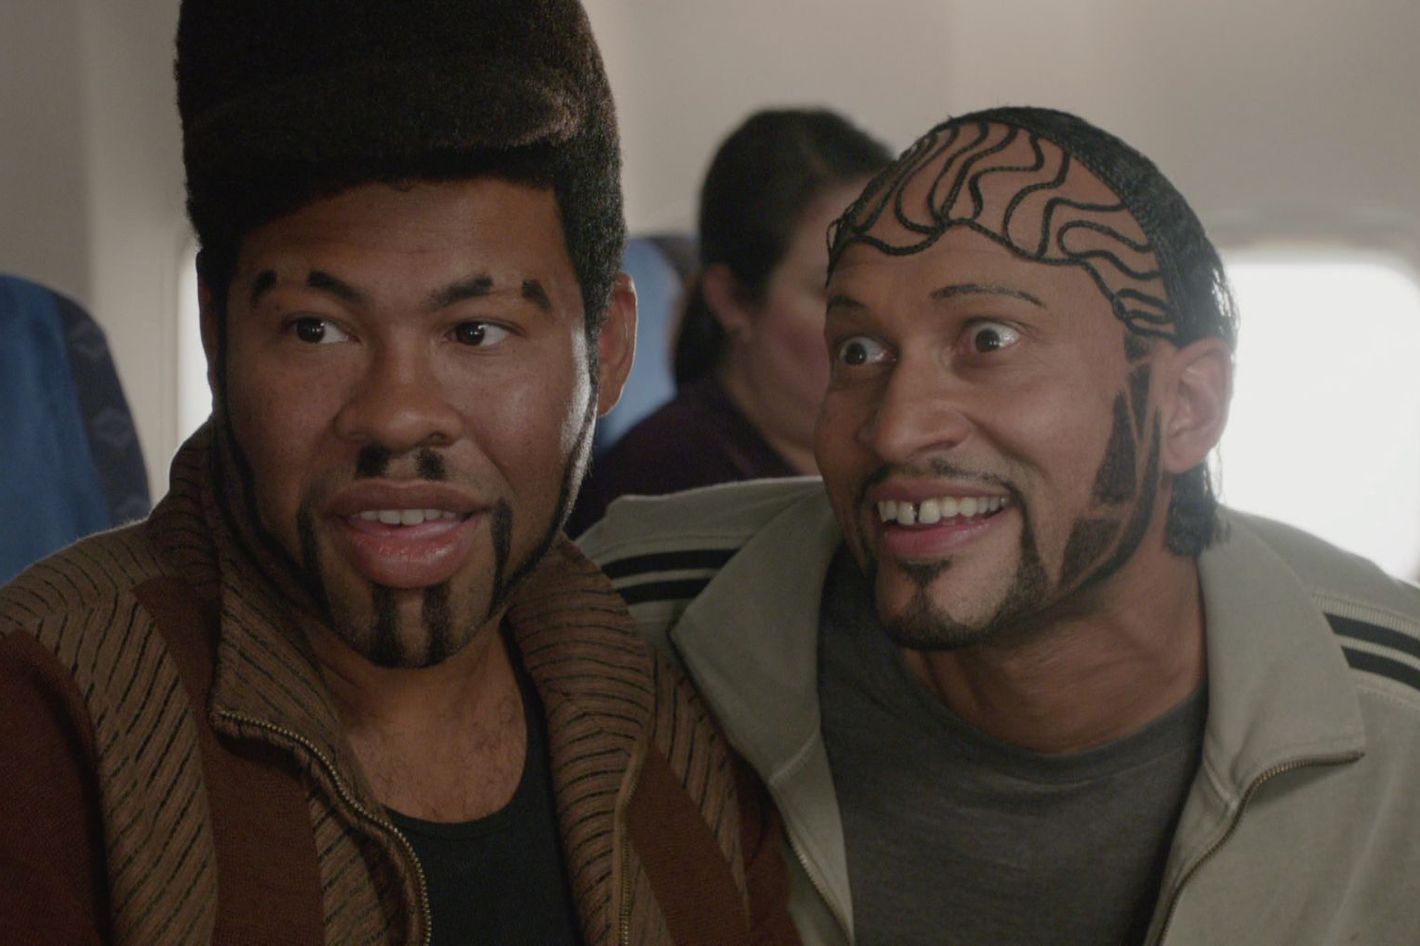 39 comedians and comic actors recall their favorite key & peele sketches